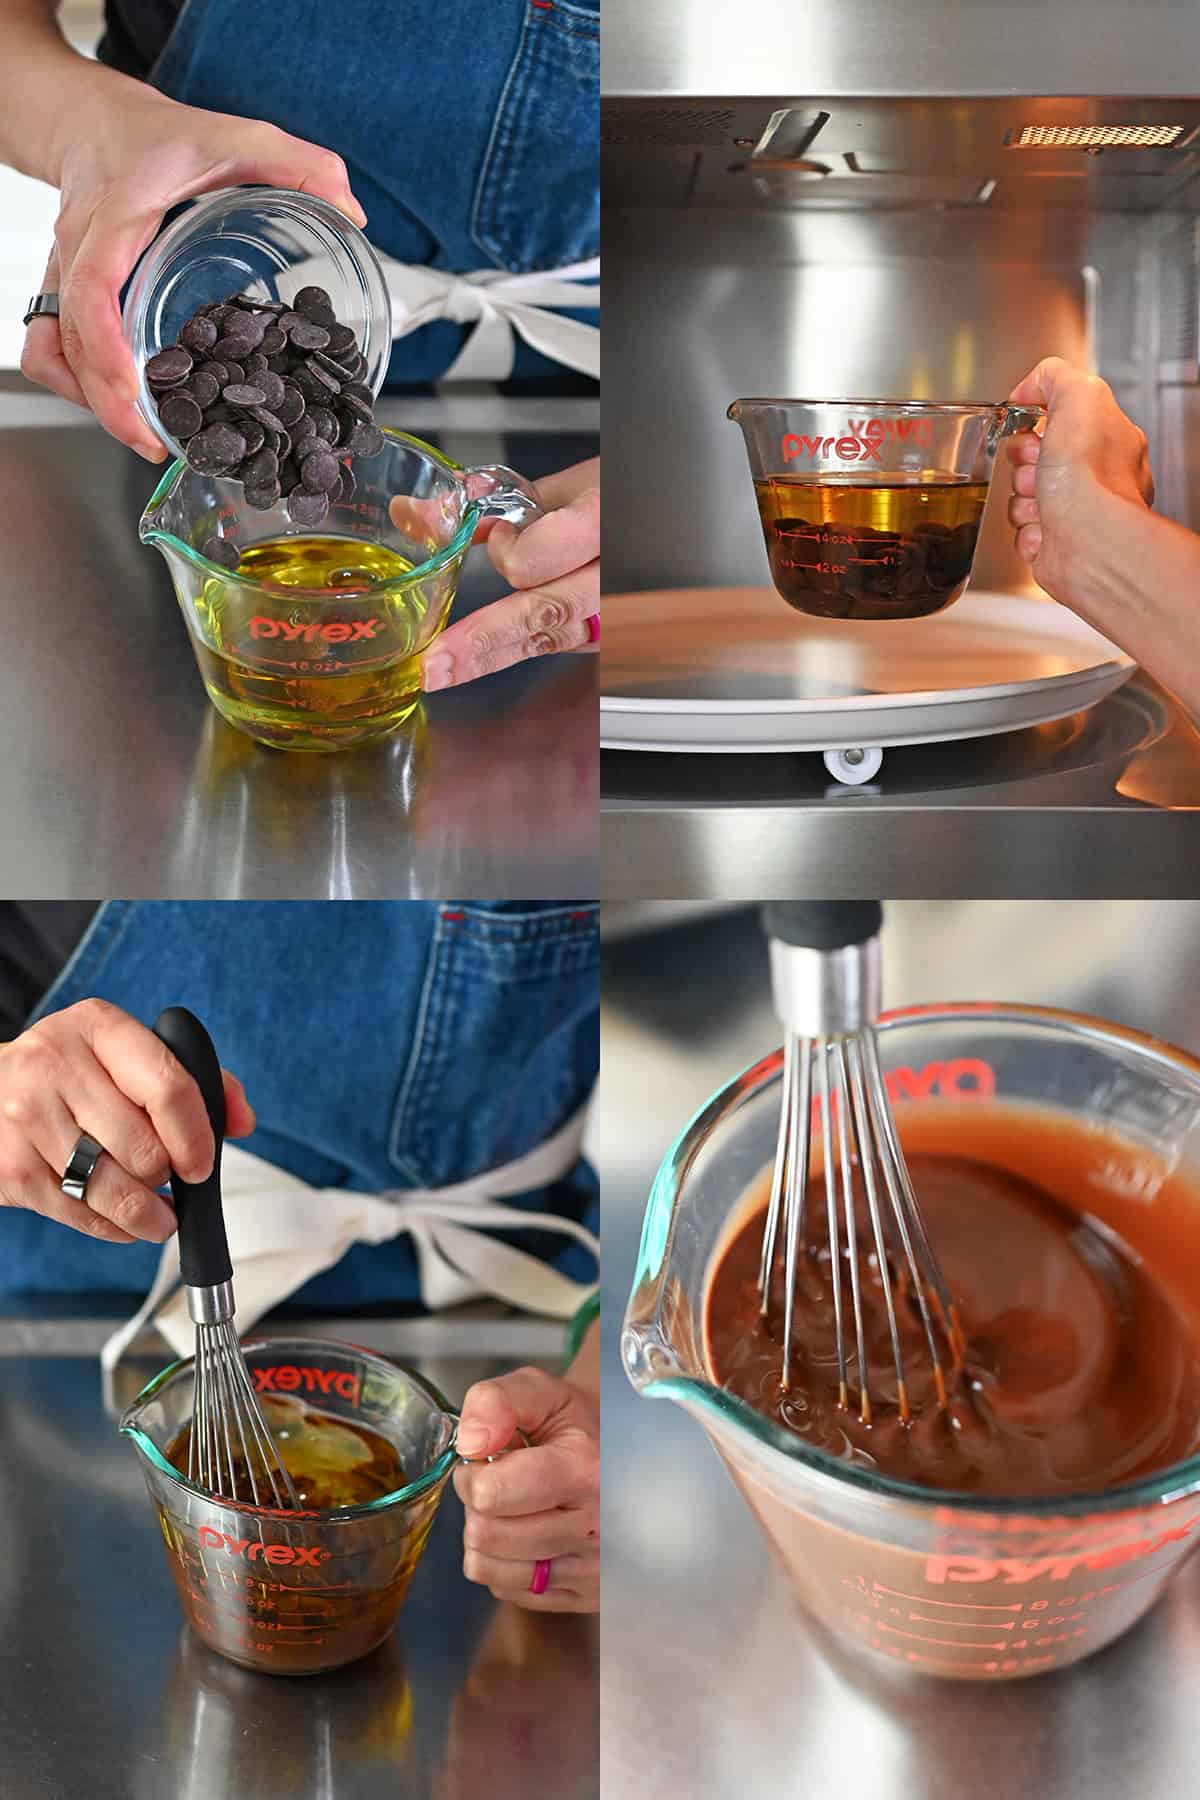 Adding dark chocolate chips to a glass measuring cup with avocado oil, microwaving it for 1 minute, and then stirring it until it is uniform.